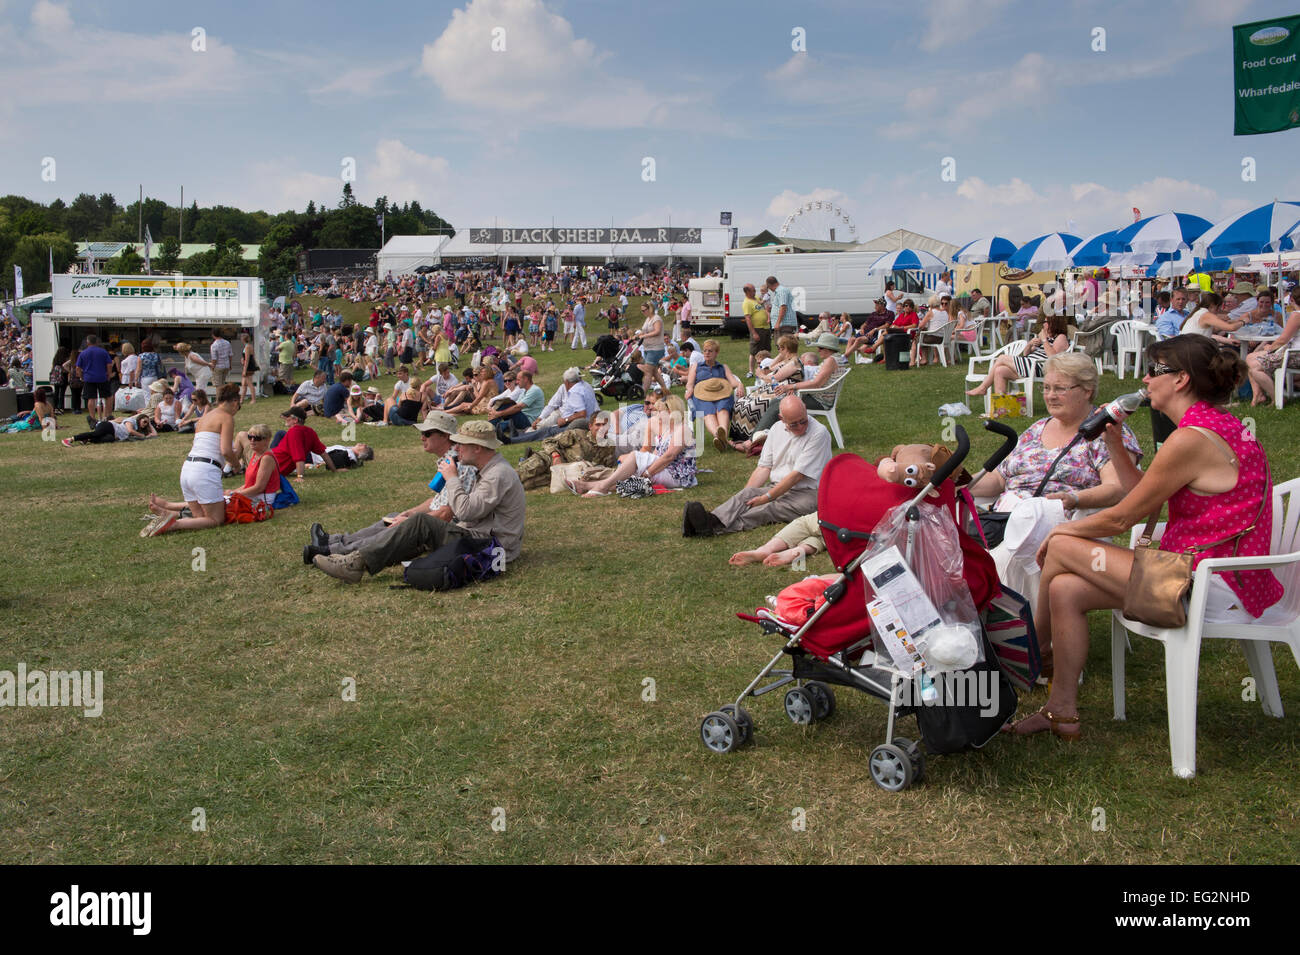 Day out for crowd of people sitting on grass or chairs drinking, eating, resting & relaxing in sunshine at The Great Yorkshire Show, England, GB, UK. Stock Photo